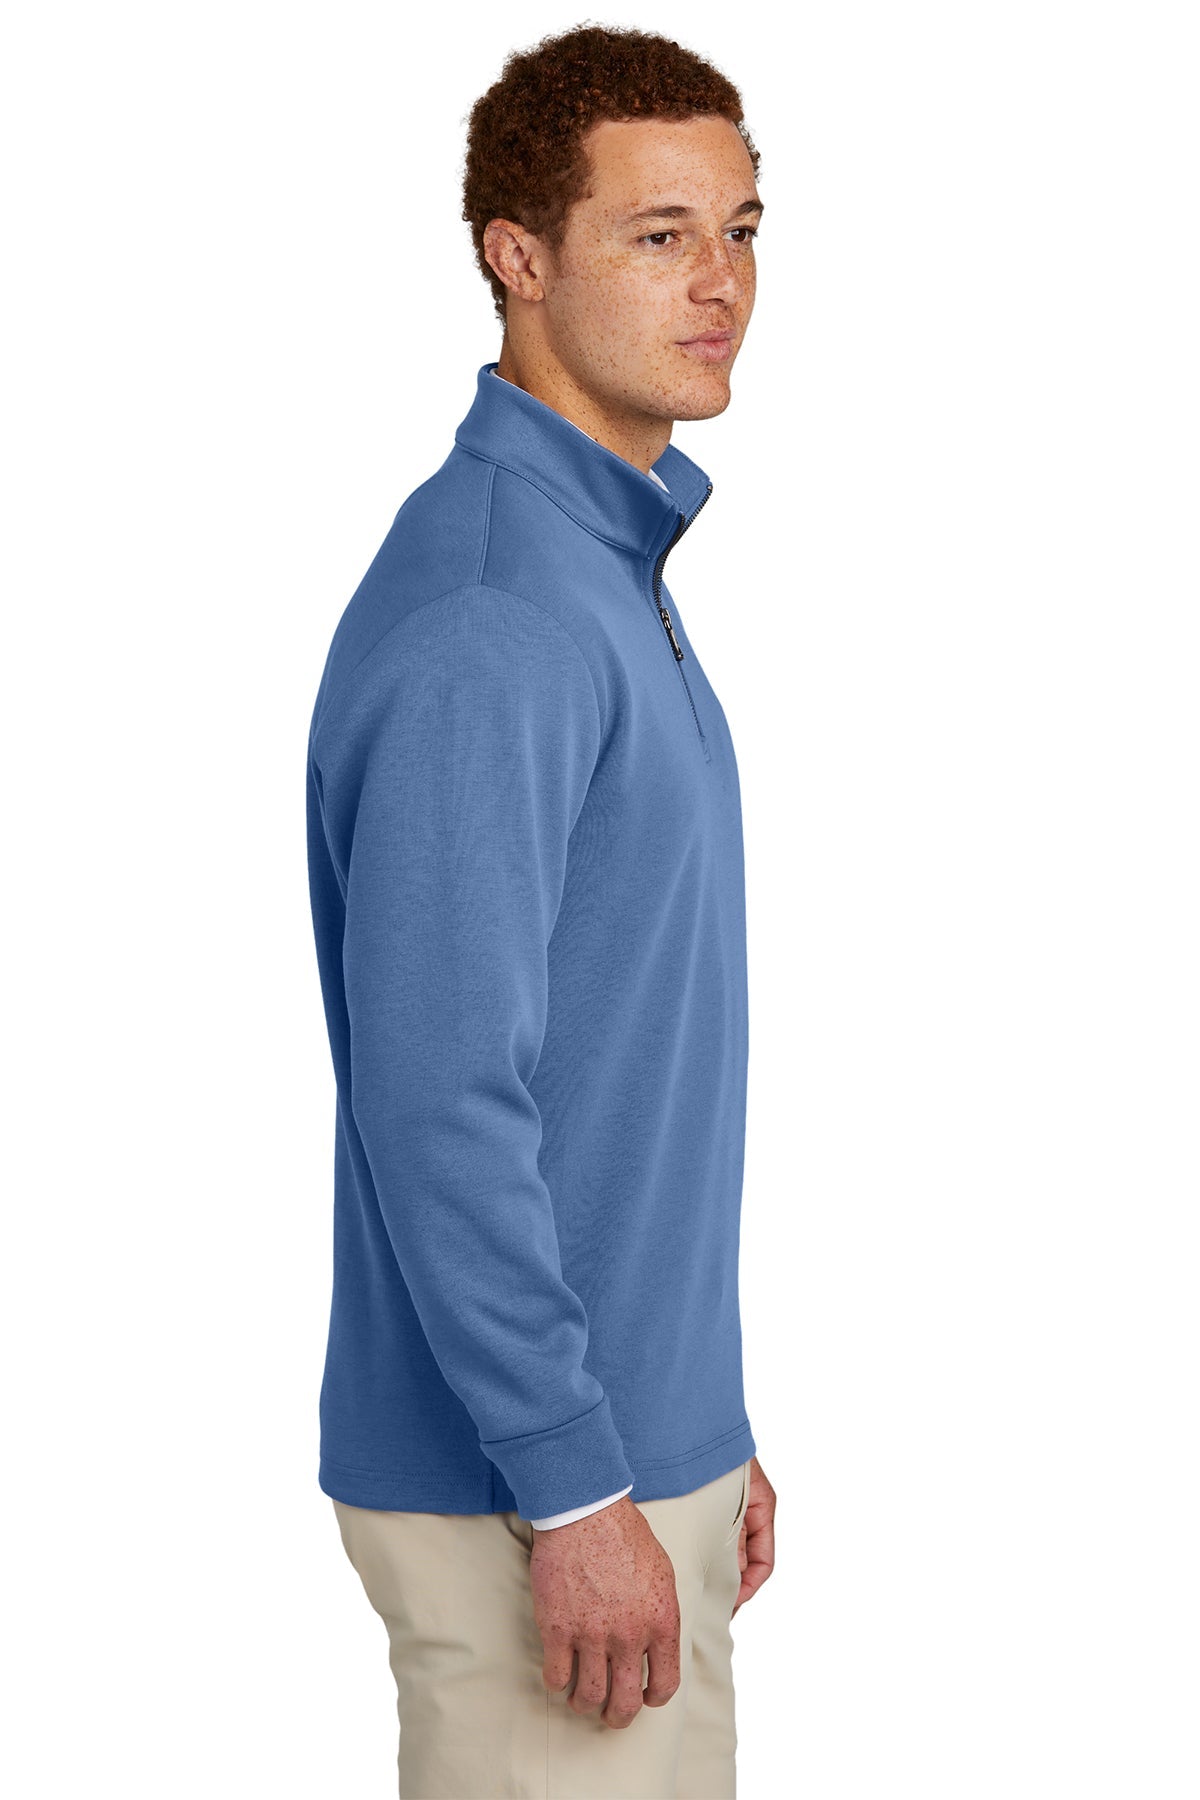 Brooks Brothers Double-Knit 1/4-Zip, Charter Blue